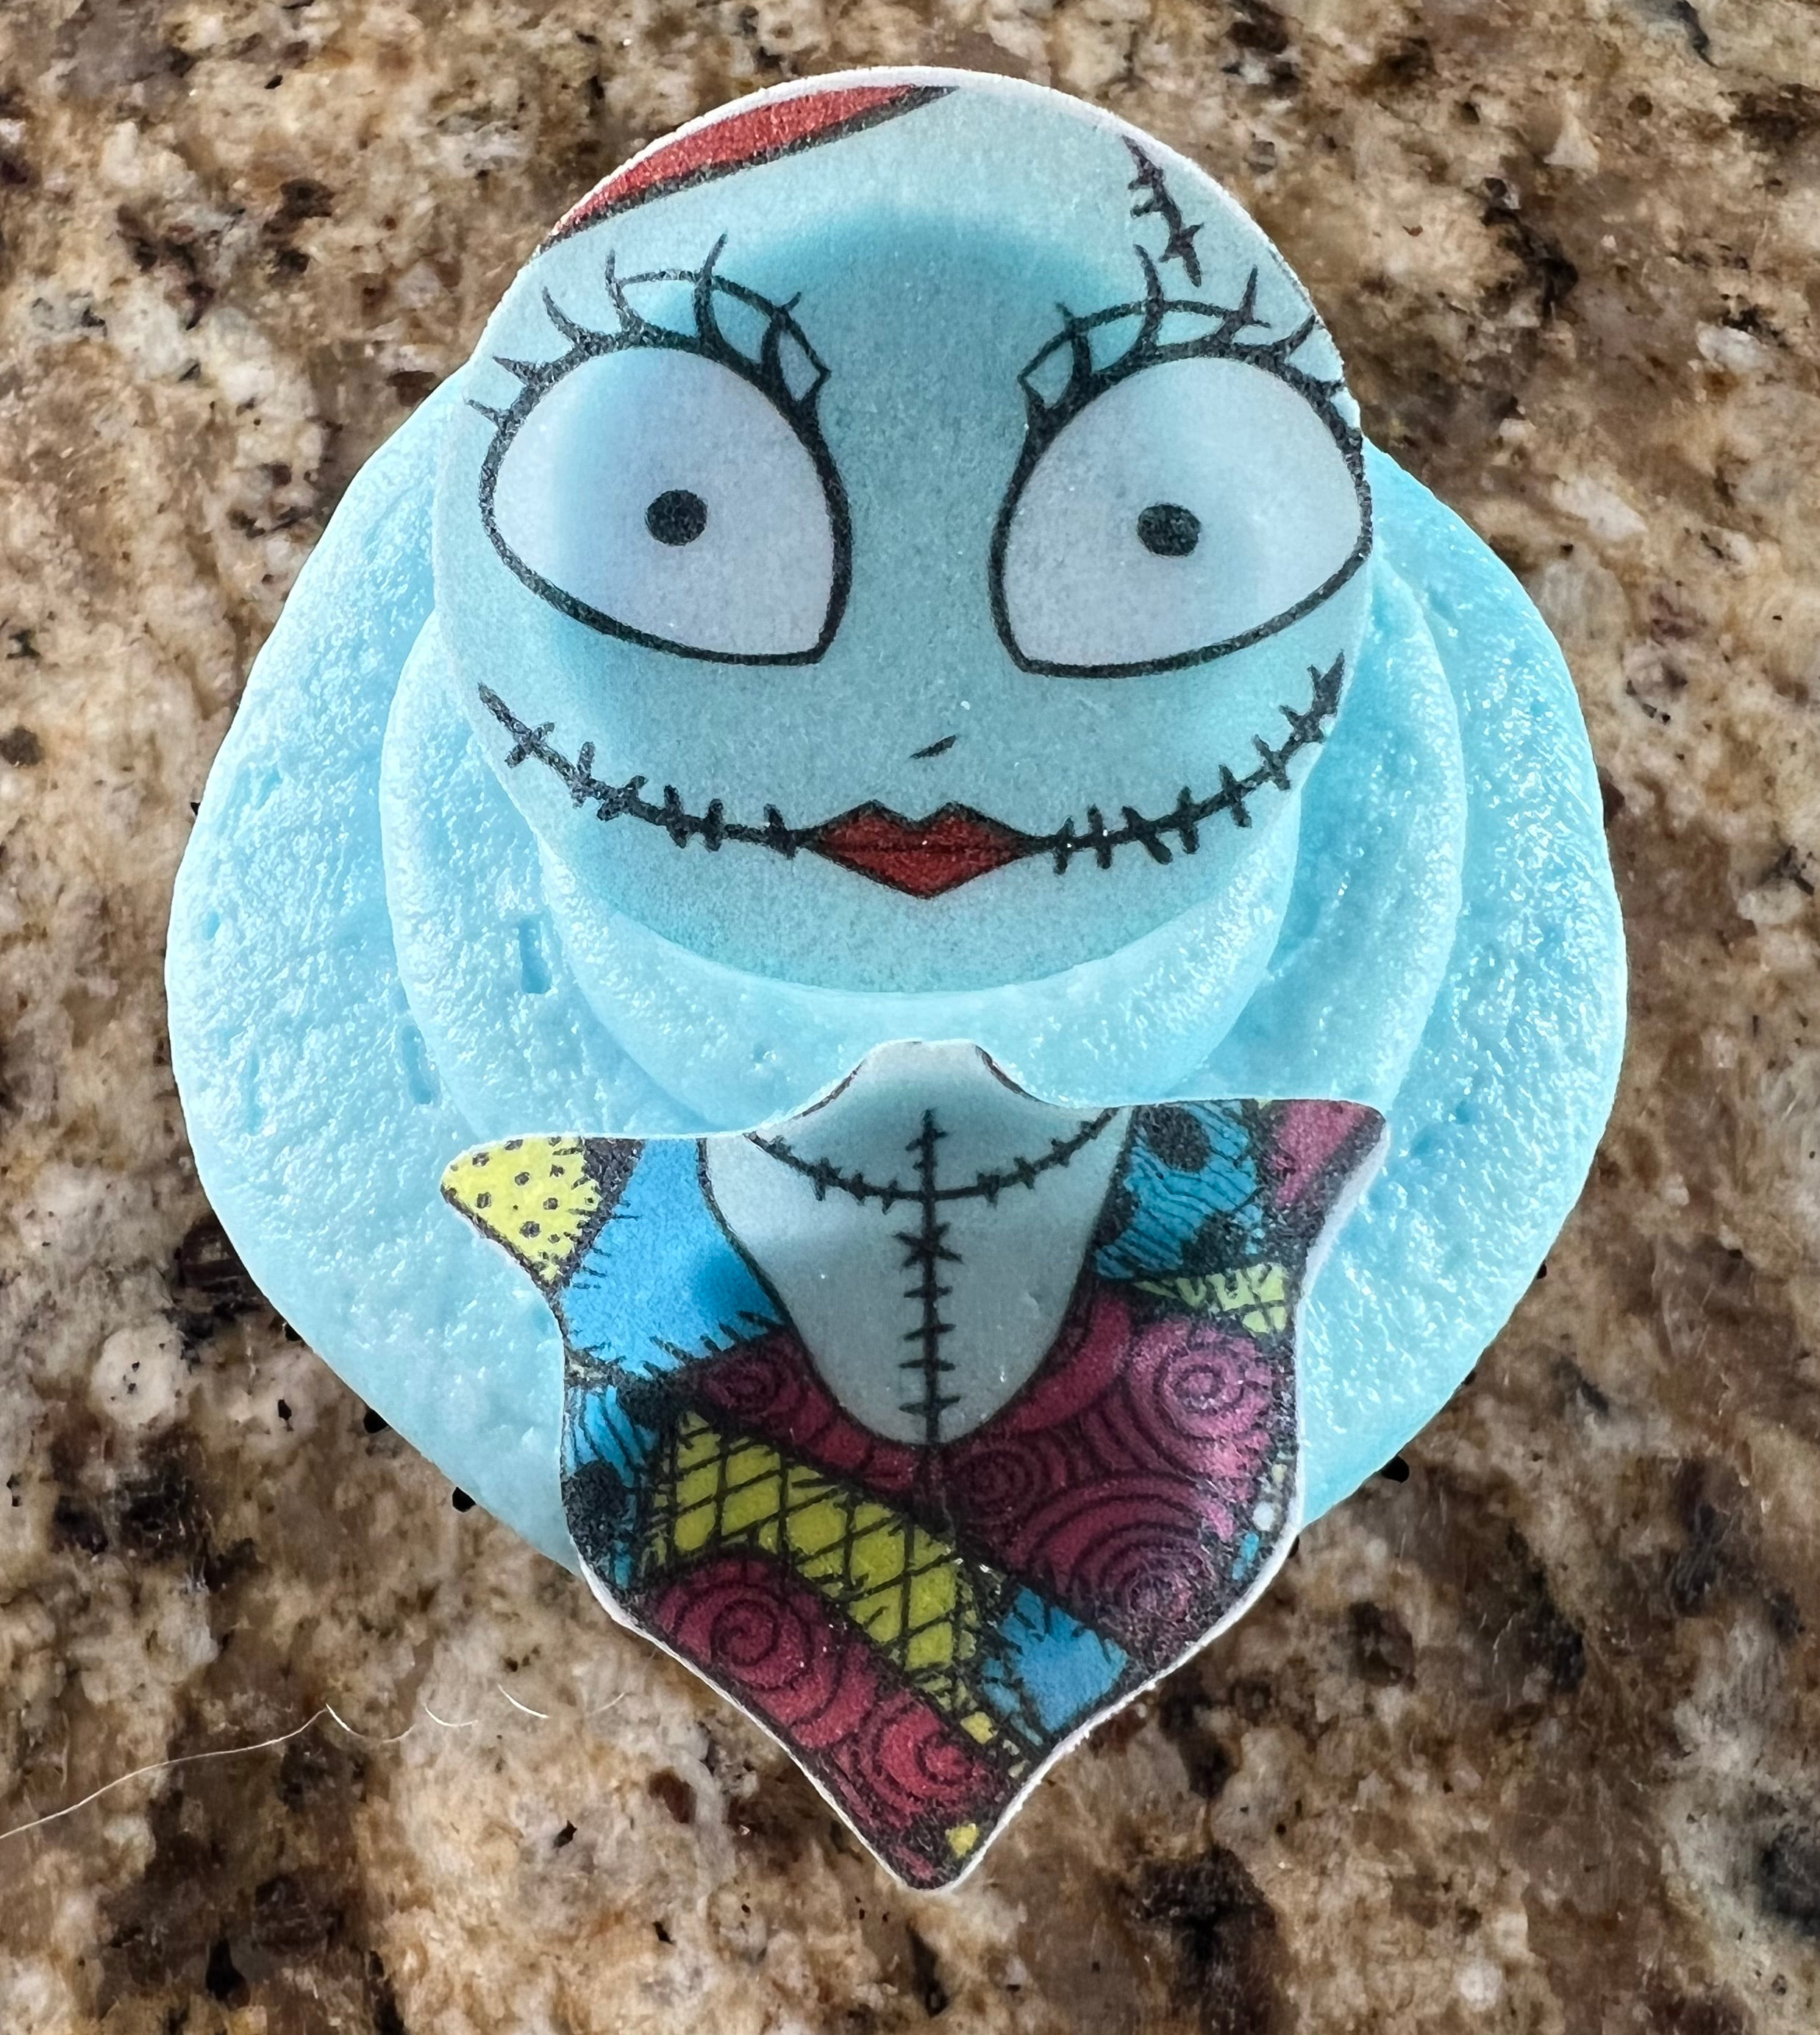 The Nightmare Before Christmas Best Edible Cake Topper Image